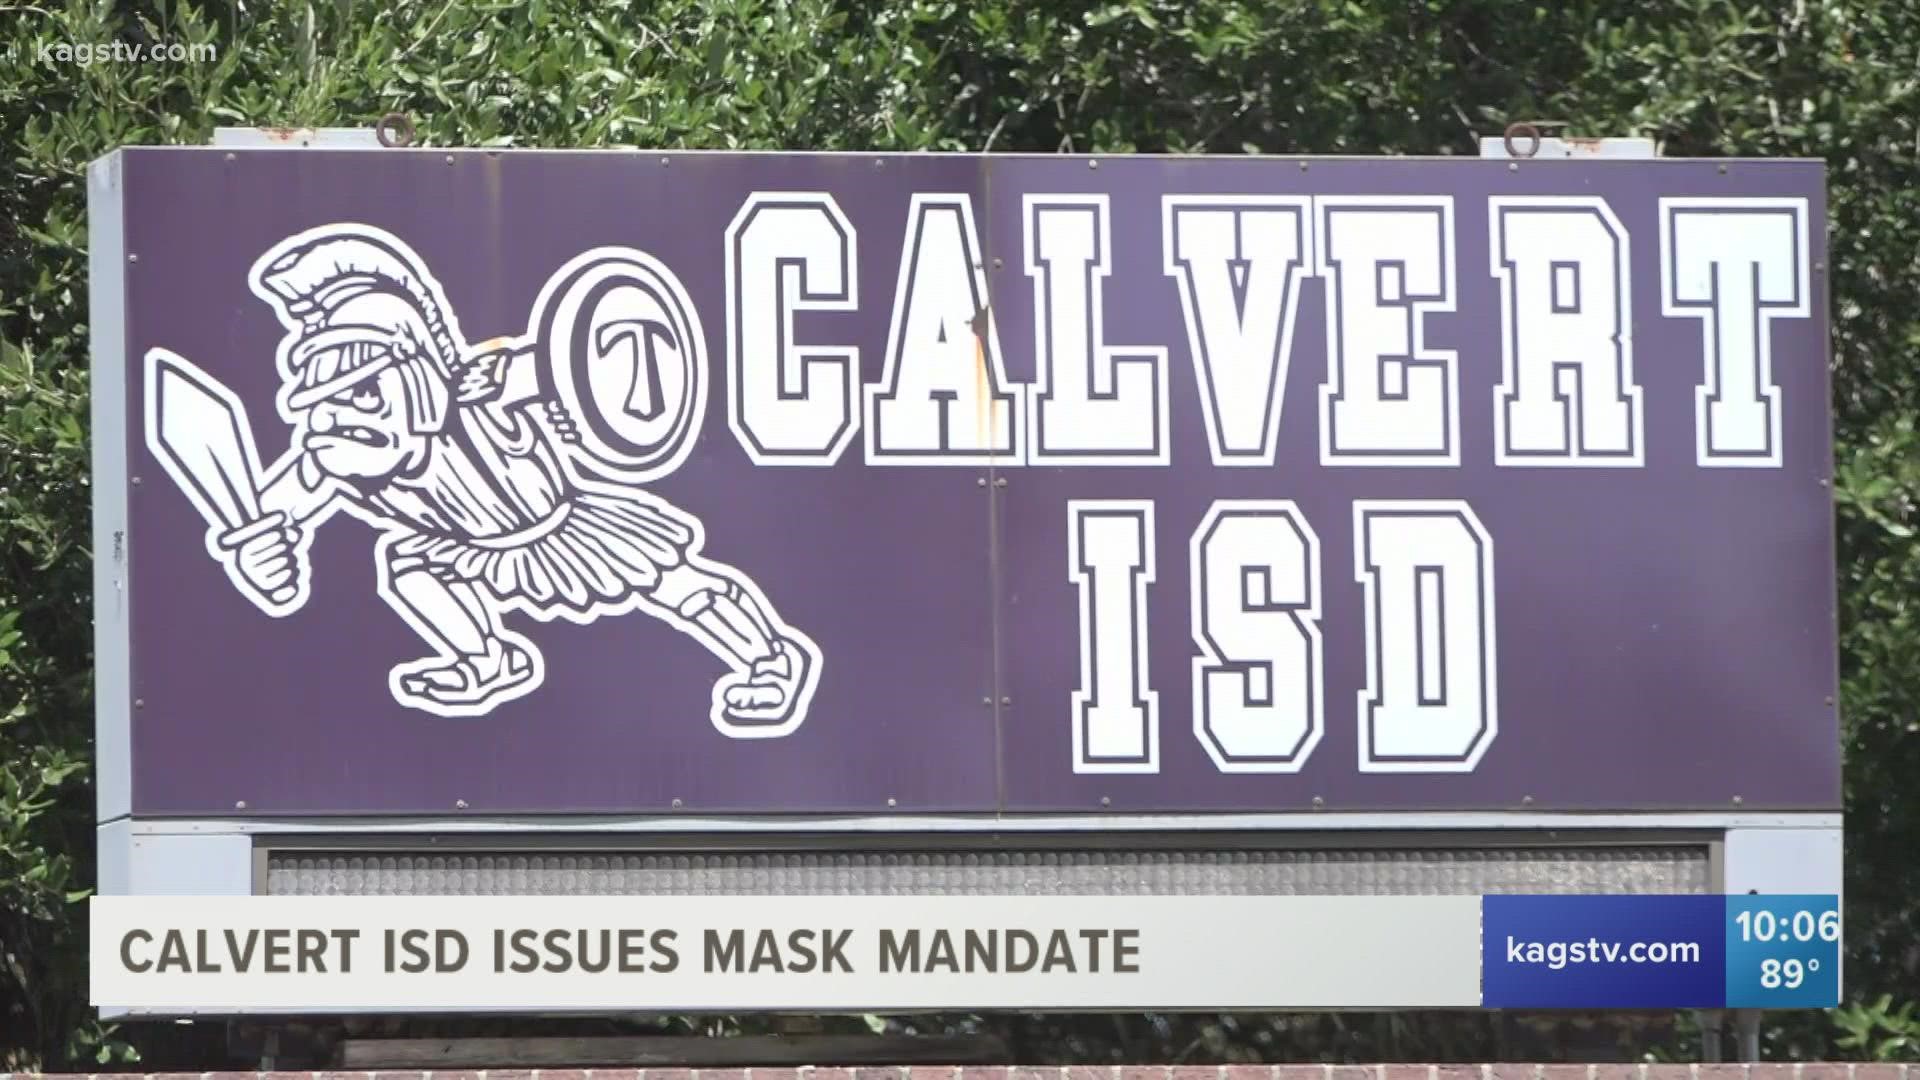 The Texas Supreme Court recently ruled in favor of giving school districts the option to enforce mask regulations